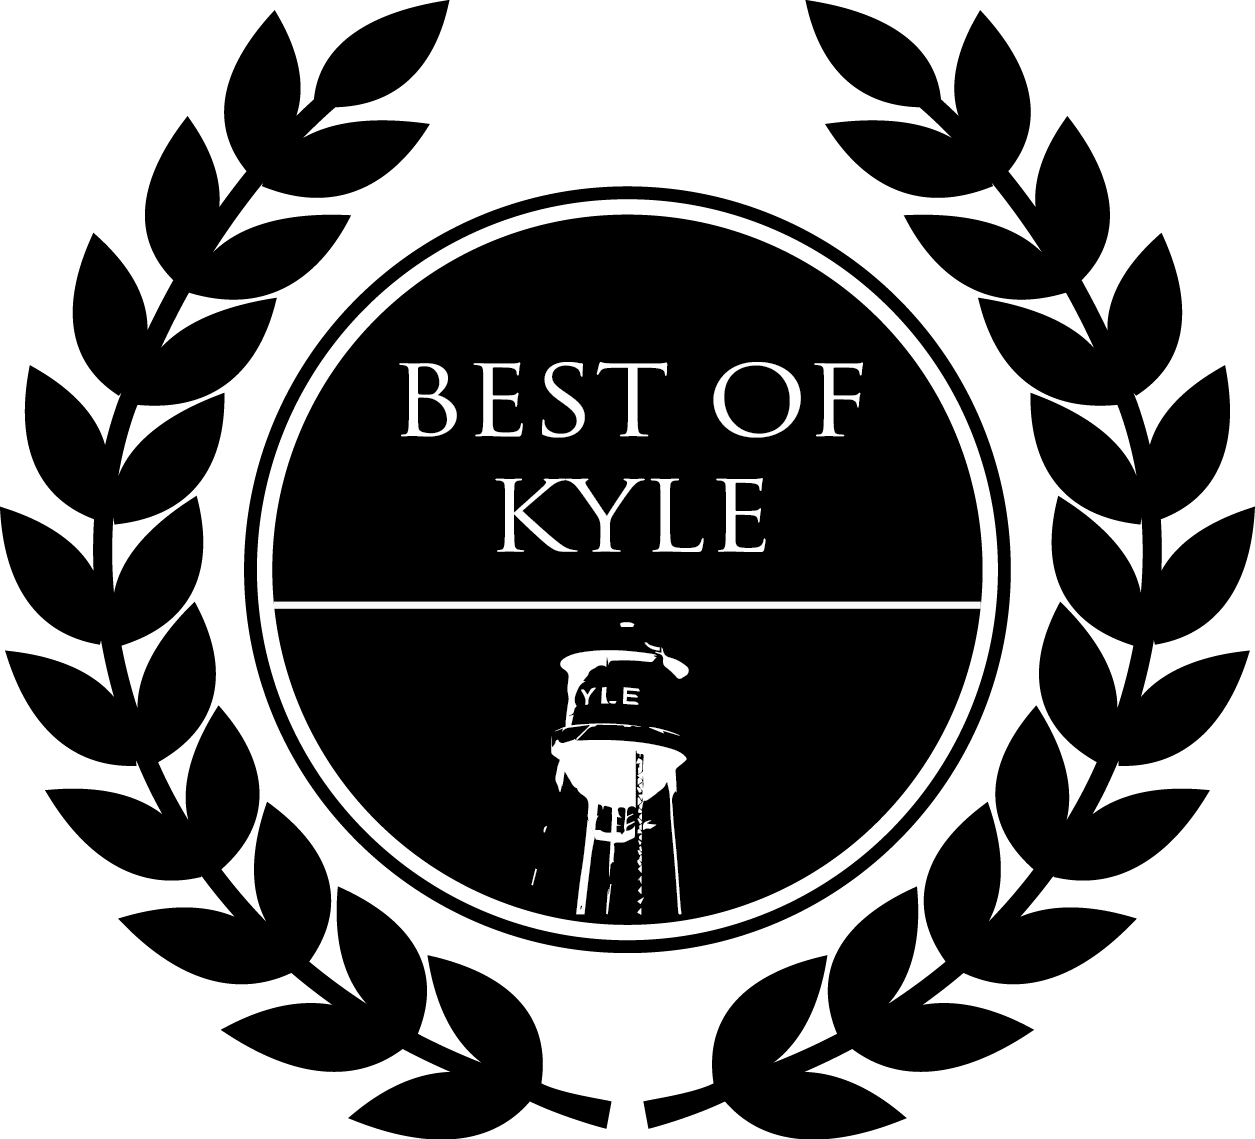 Best of Kyle 2015 [VOTING FORM]